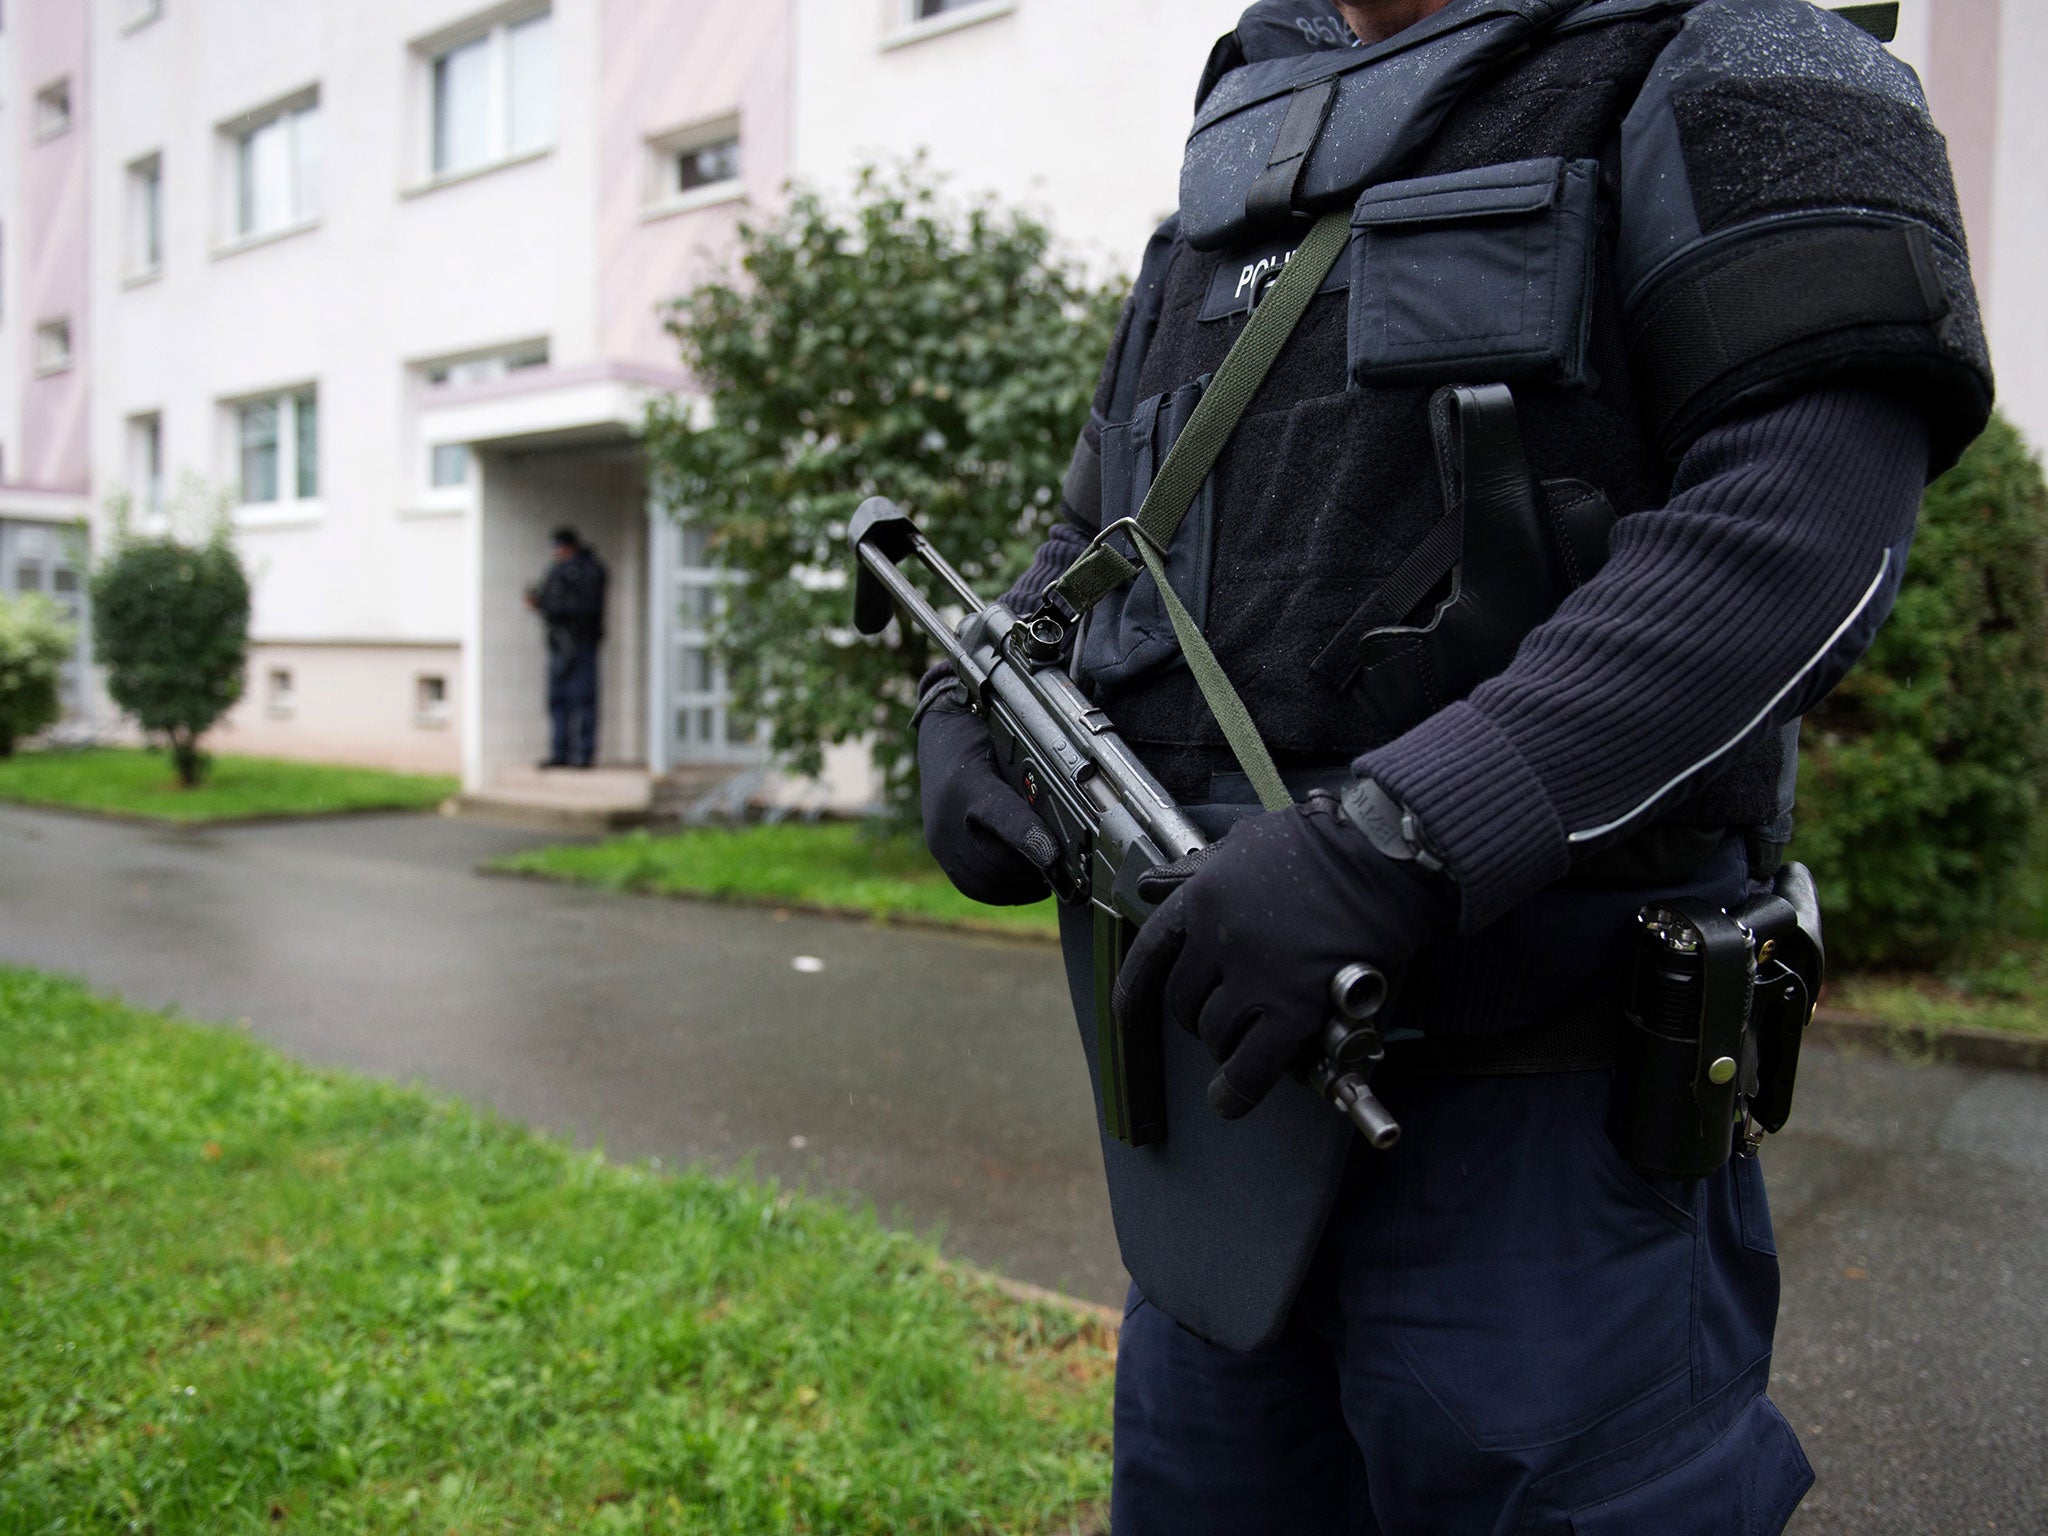 Police officers secure a residential area in Chemnitz, Germany, on 8 October